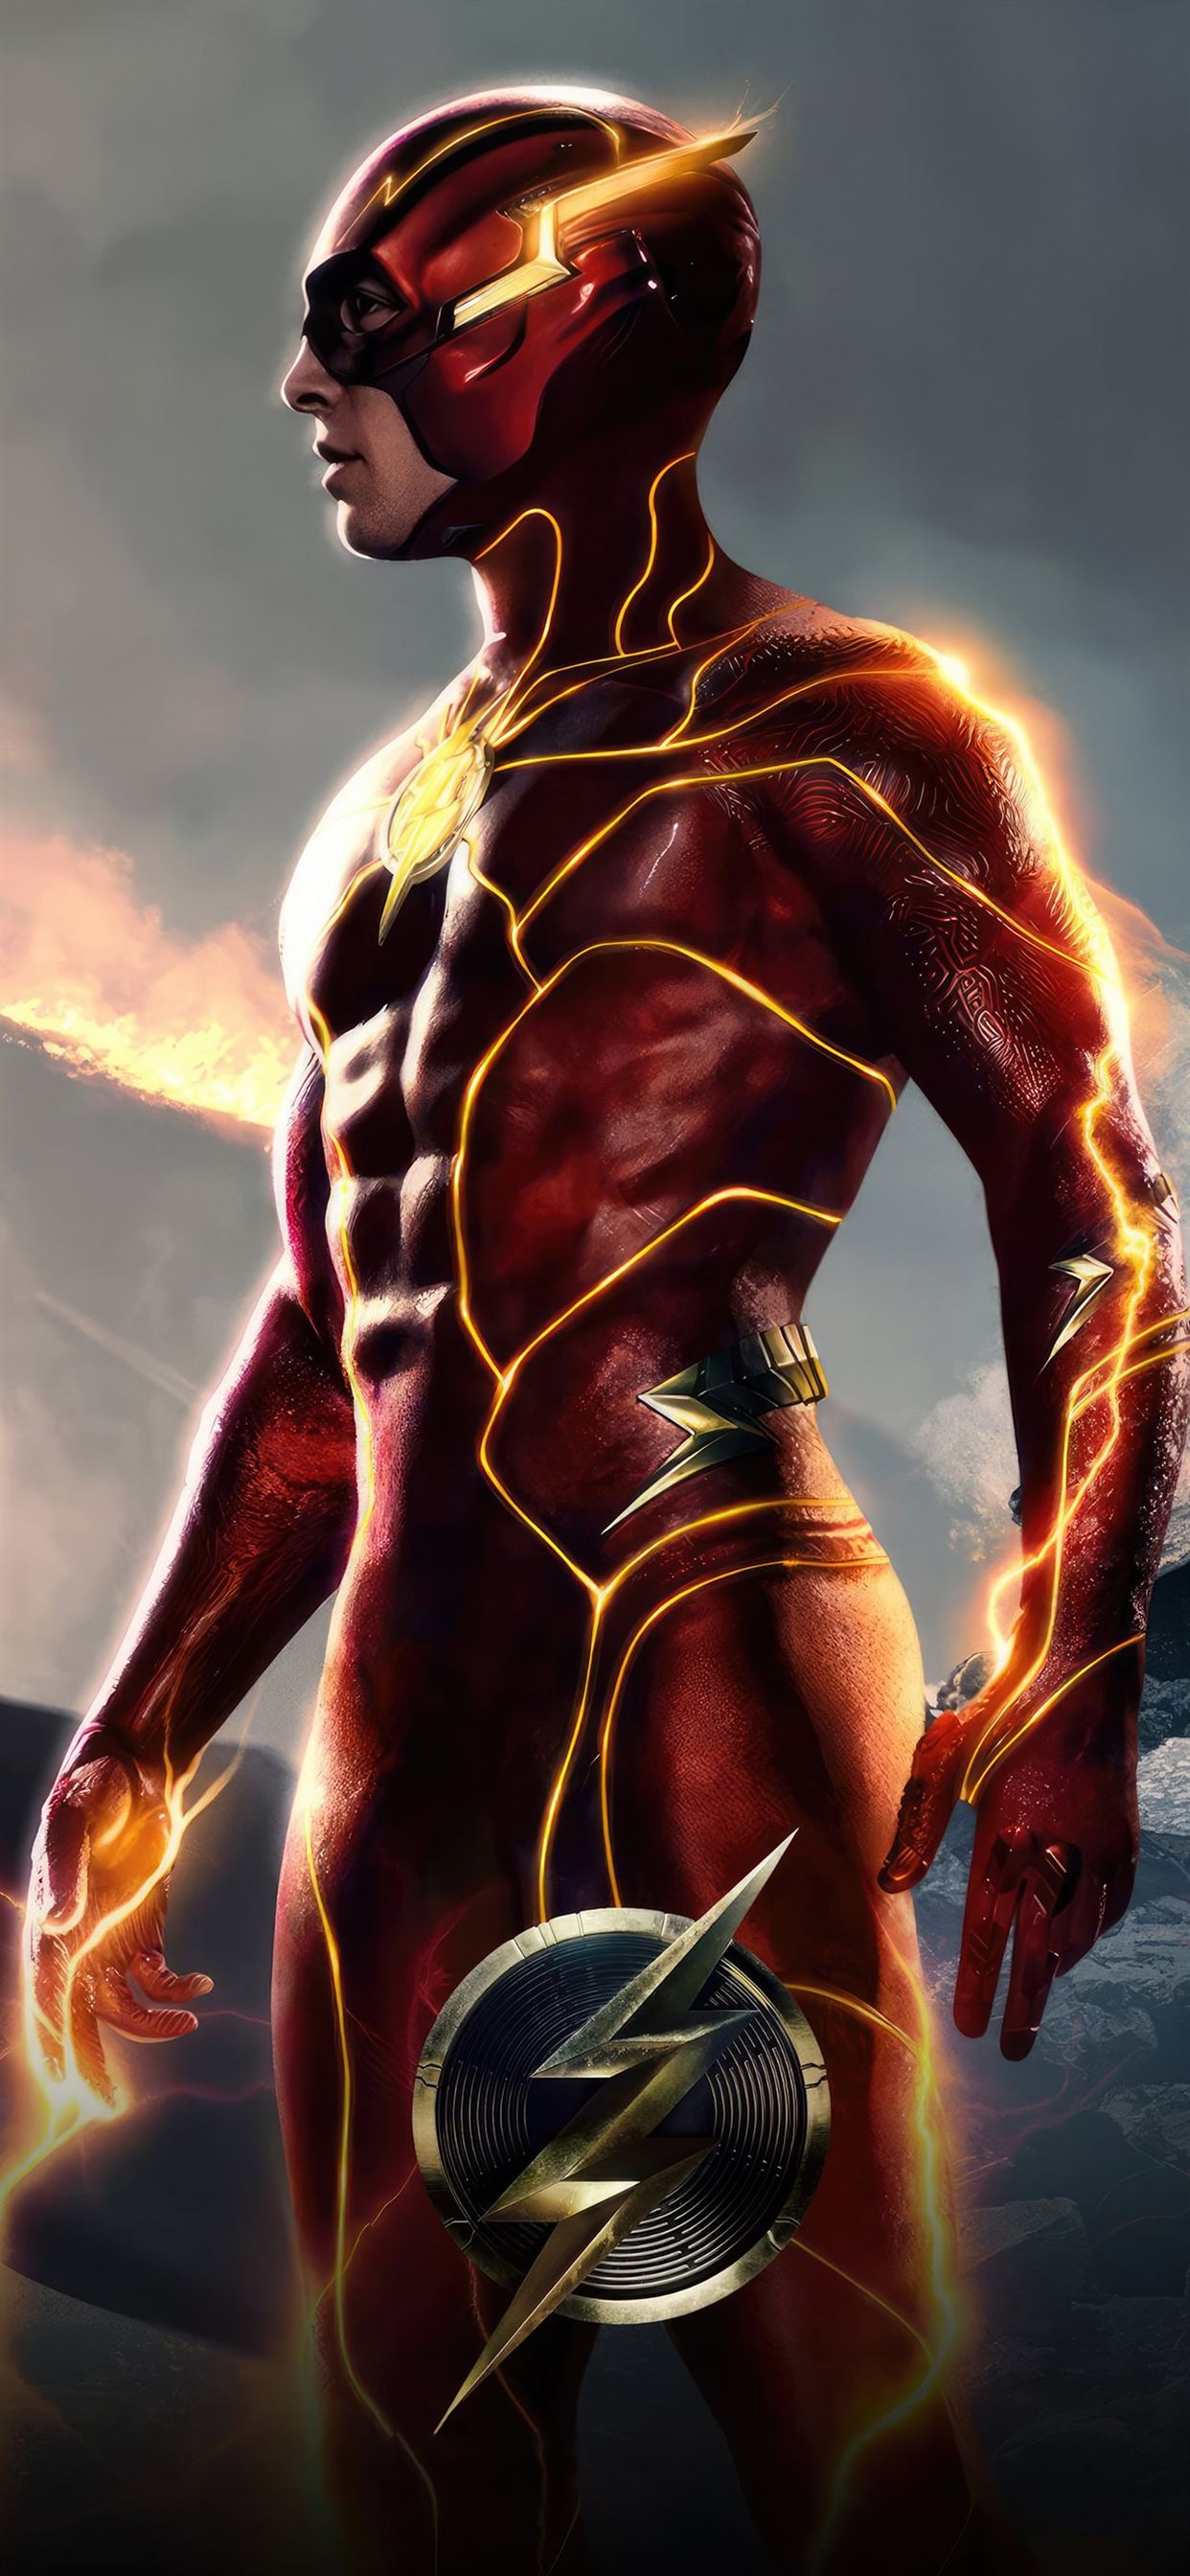 Cool The Flash Wallpapers  Top 20 Best Cool The Flash Wallpapers  HQ 